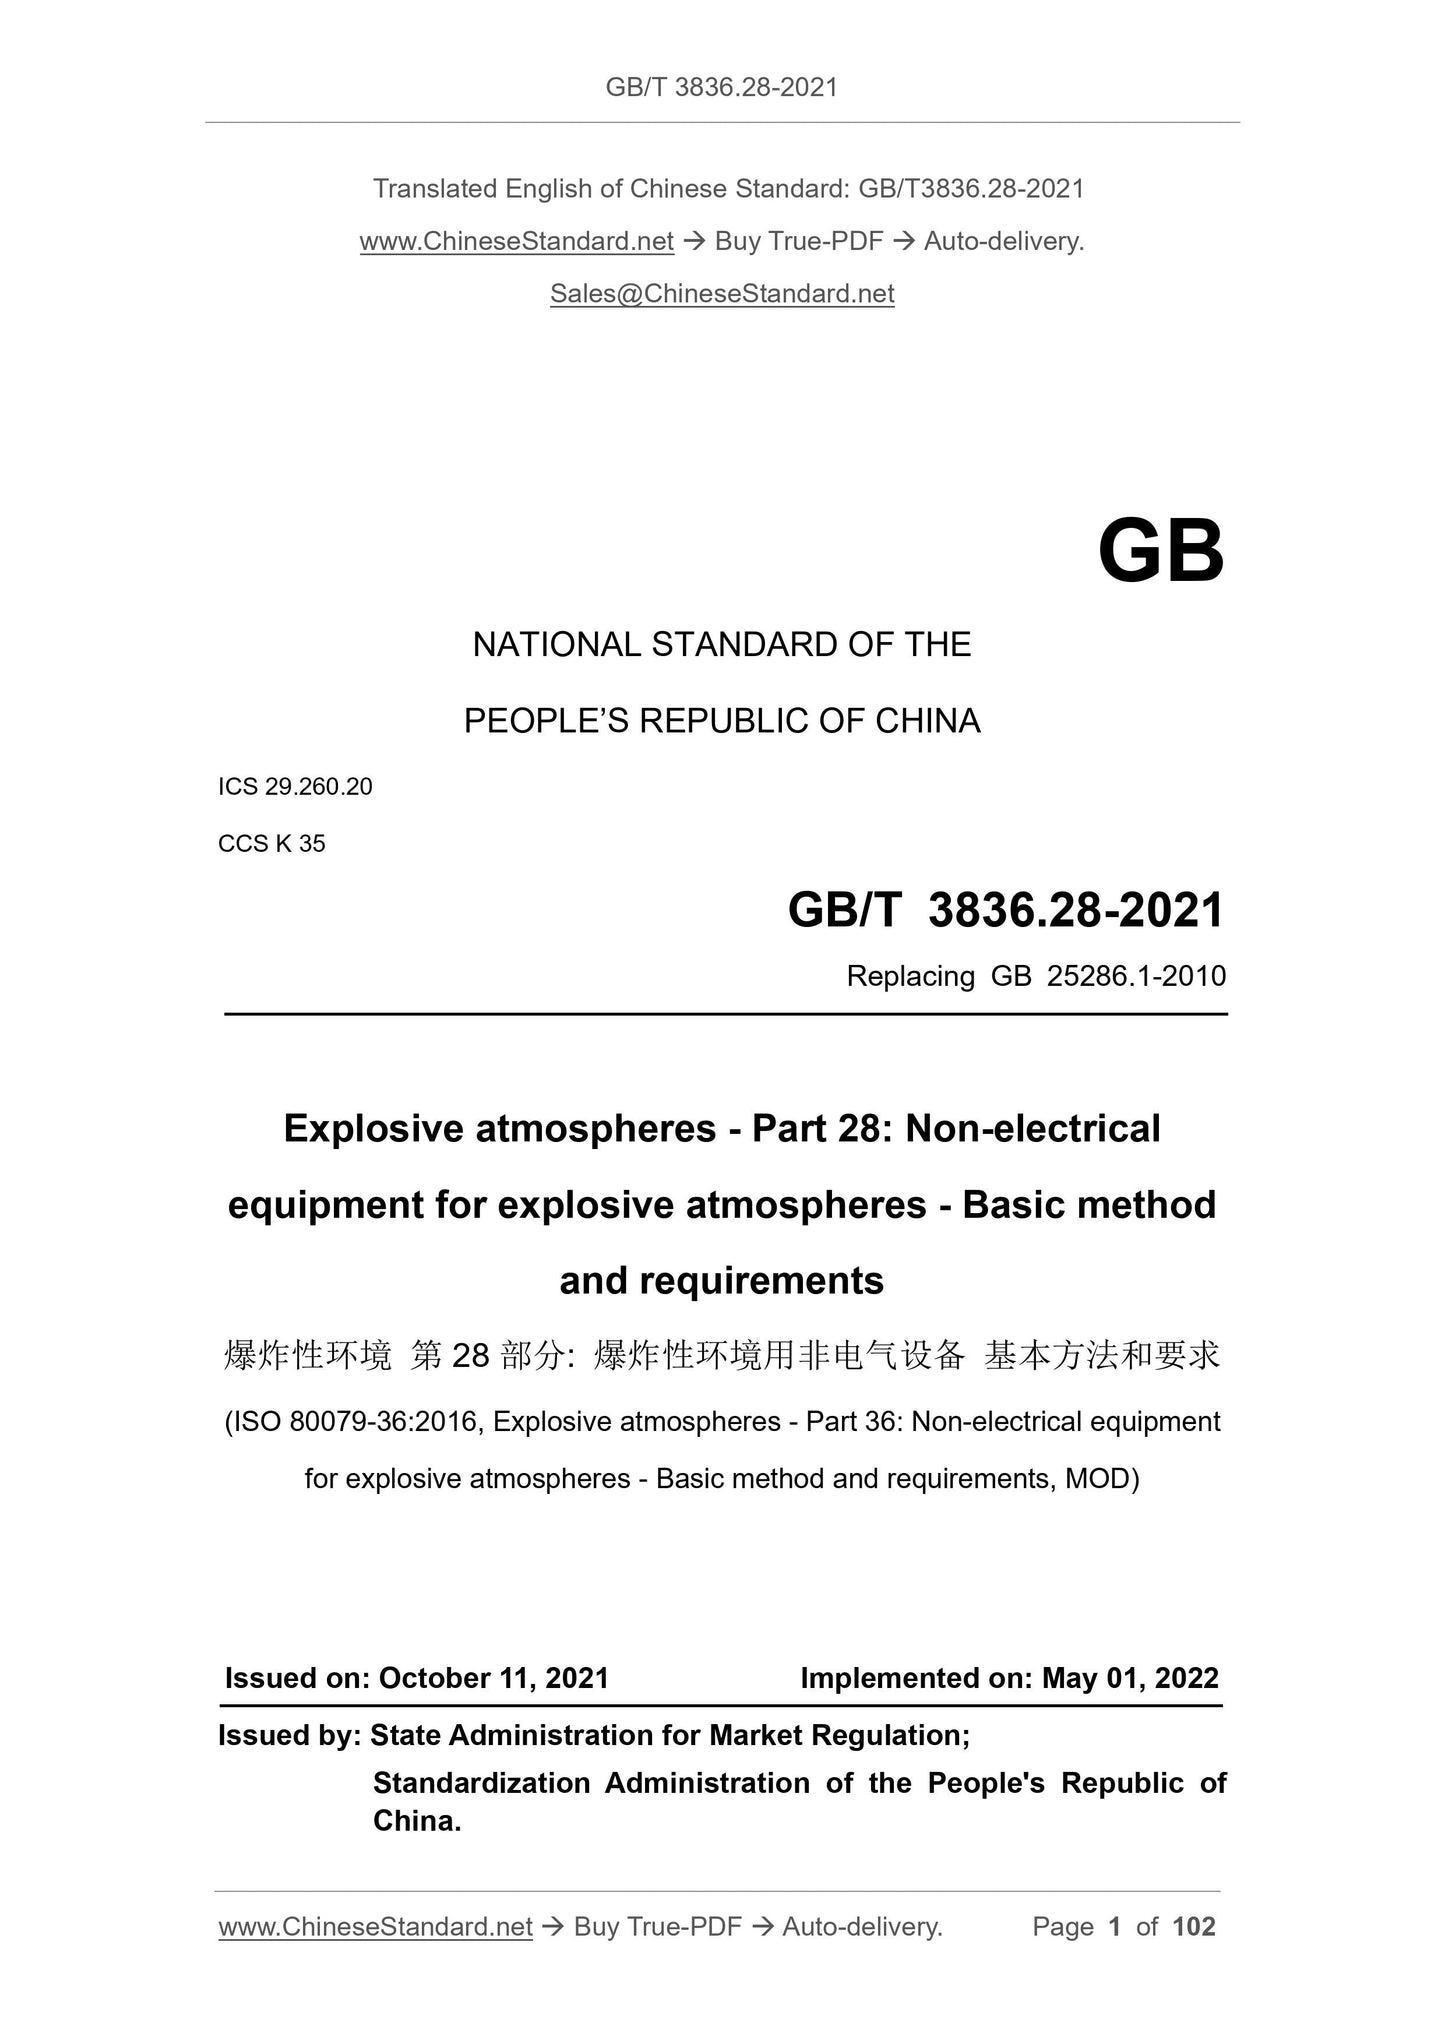 GB/T 3836.28-2021 Page 1